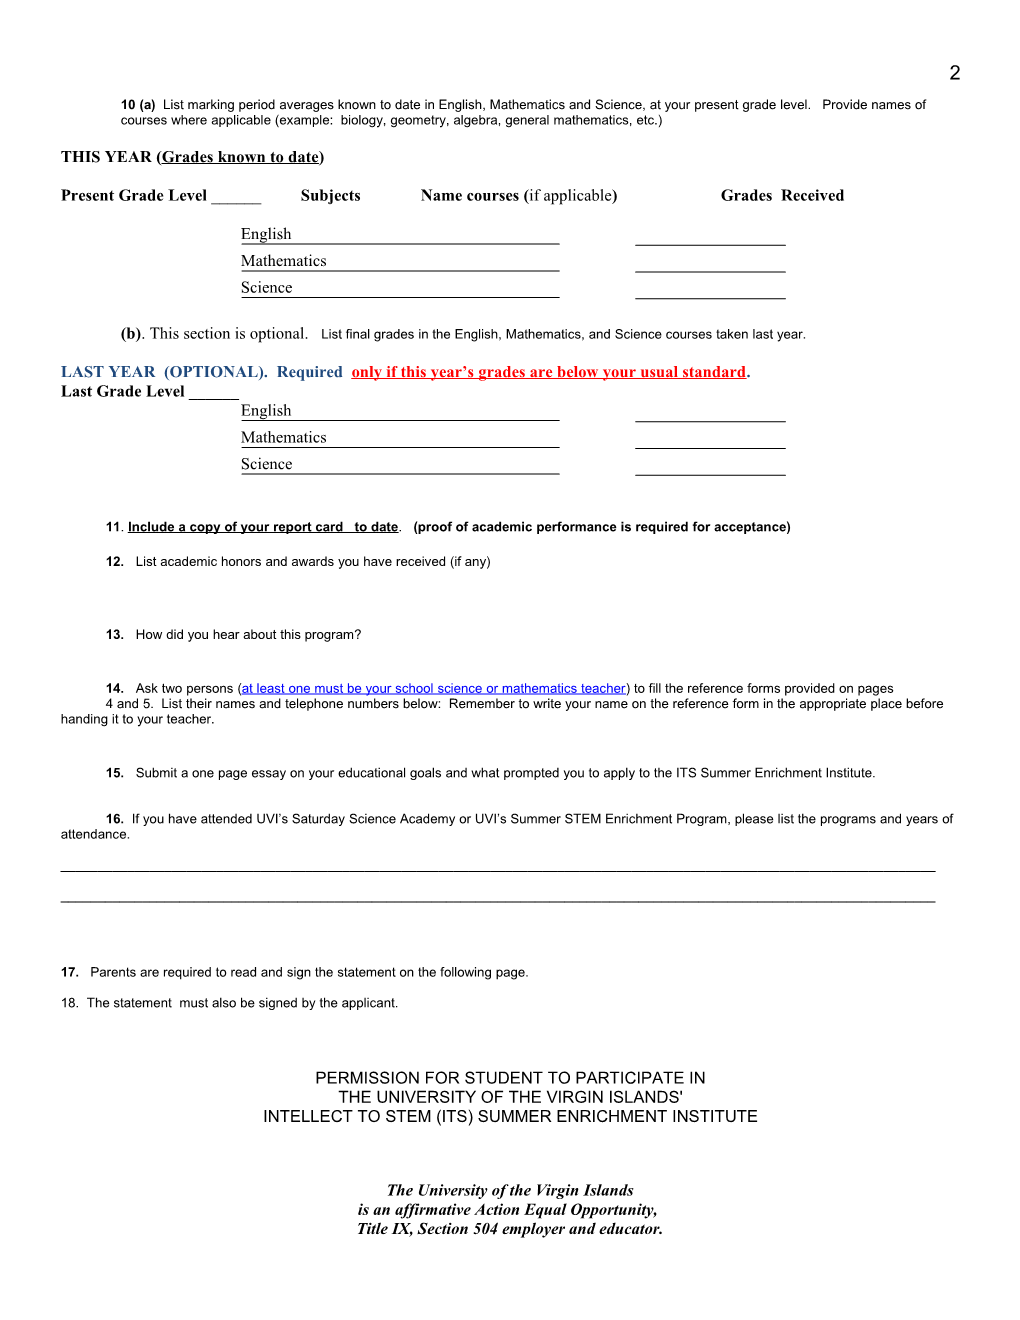 ITS SUMMER 2013 ENRICHMENT INSTITUTE Application in MS Word Format